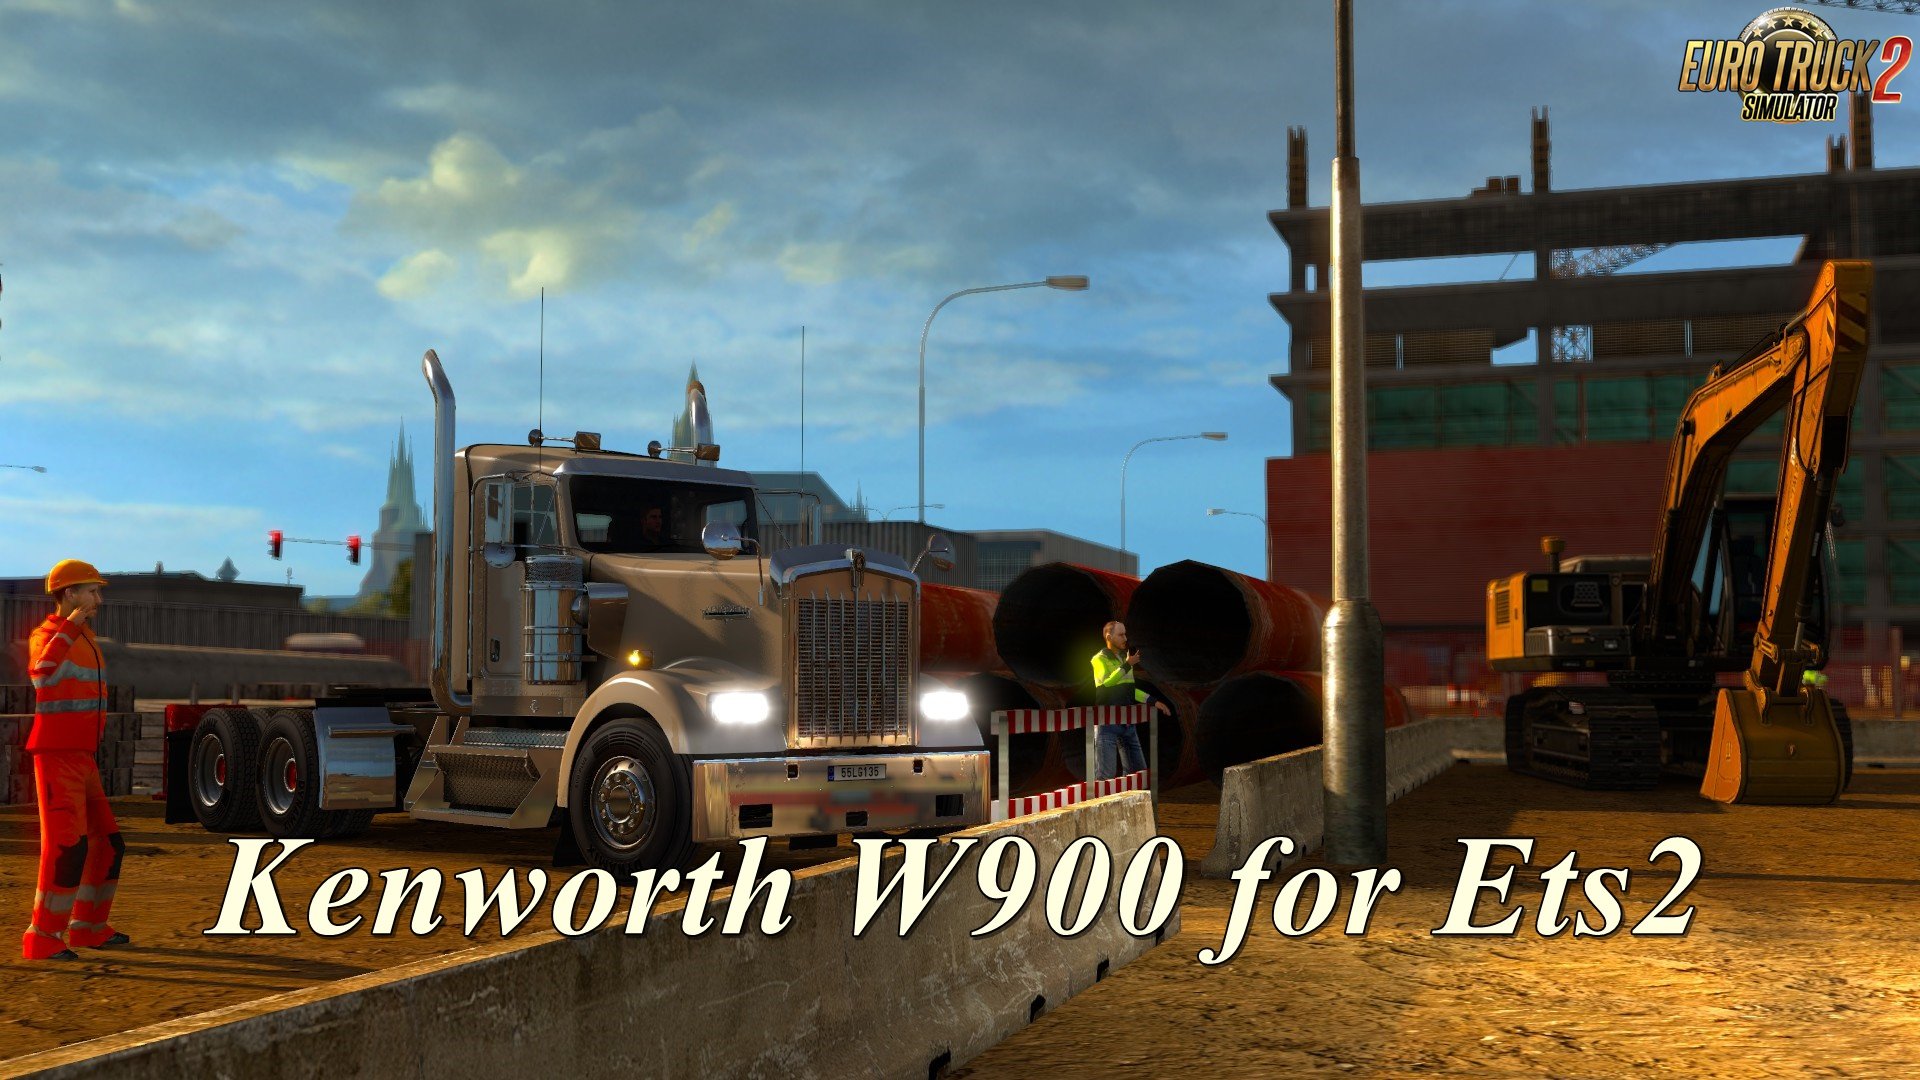 Kenworth W900 for Ets2